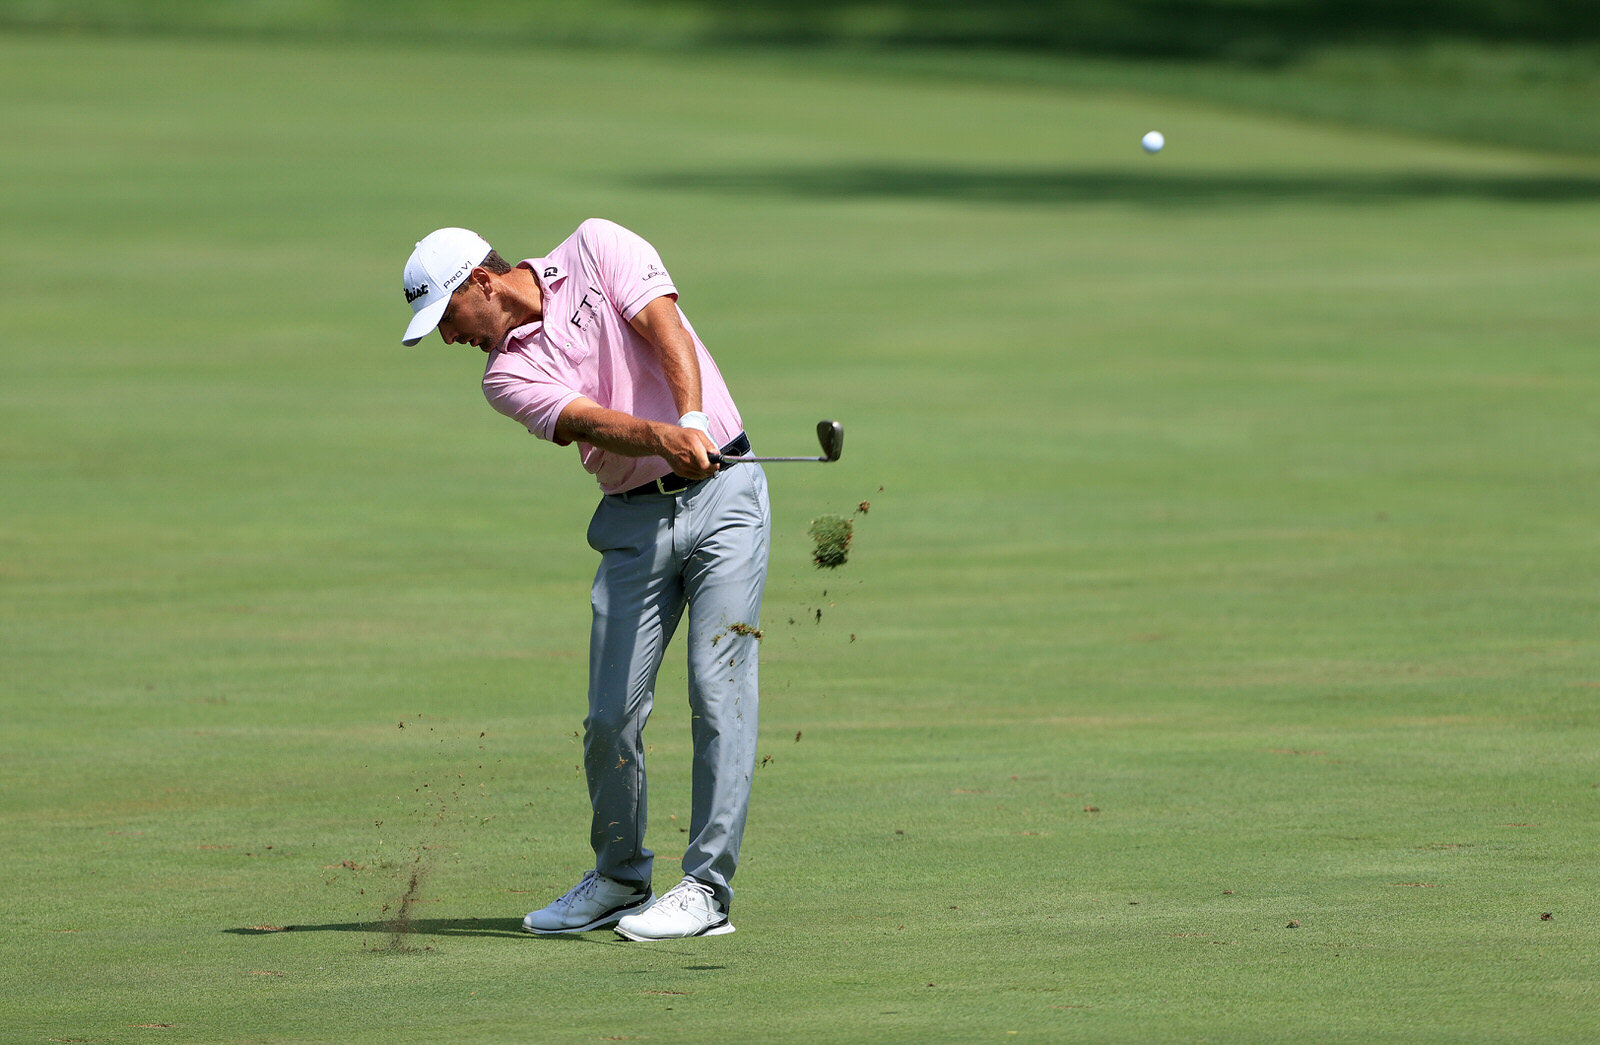  DUBLIN, OHIO - JULY 16: Charles Howell III of the United States plays his second shot on the 14th hole during the first round of The Memorial Tournament on July 16, 2020 at Muirfield Village Golf Club in Dublin, Ohio. (Photo by Sam Greenwood/Getty I